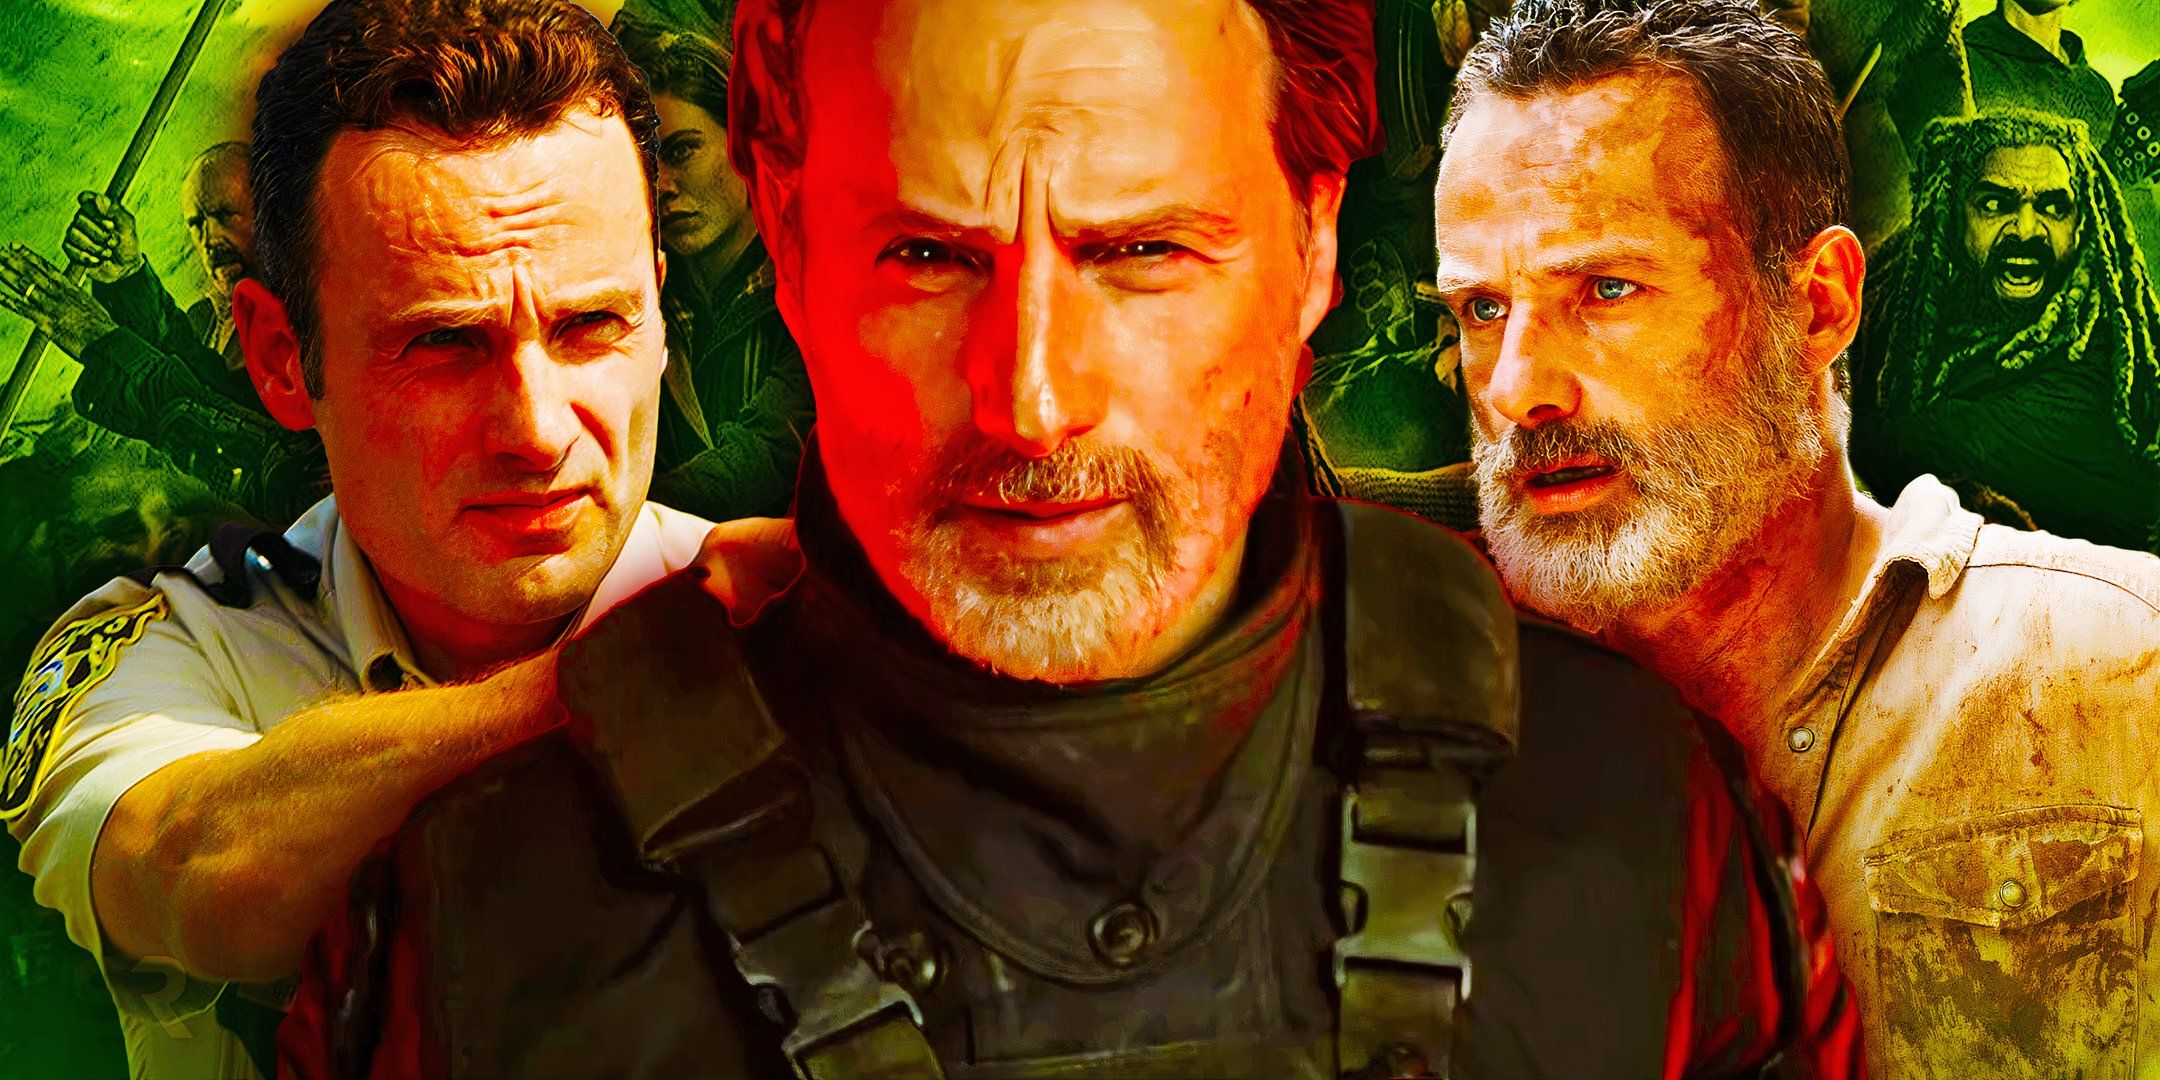 Andrew Lincoln as Rick Grimes throughout his years on The Walking Dead with other characters in the background